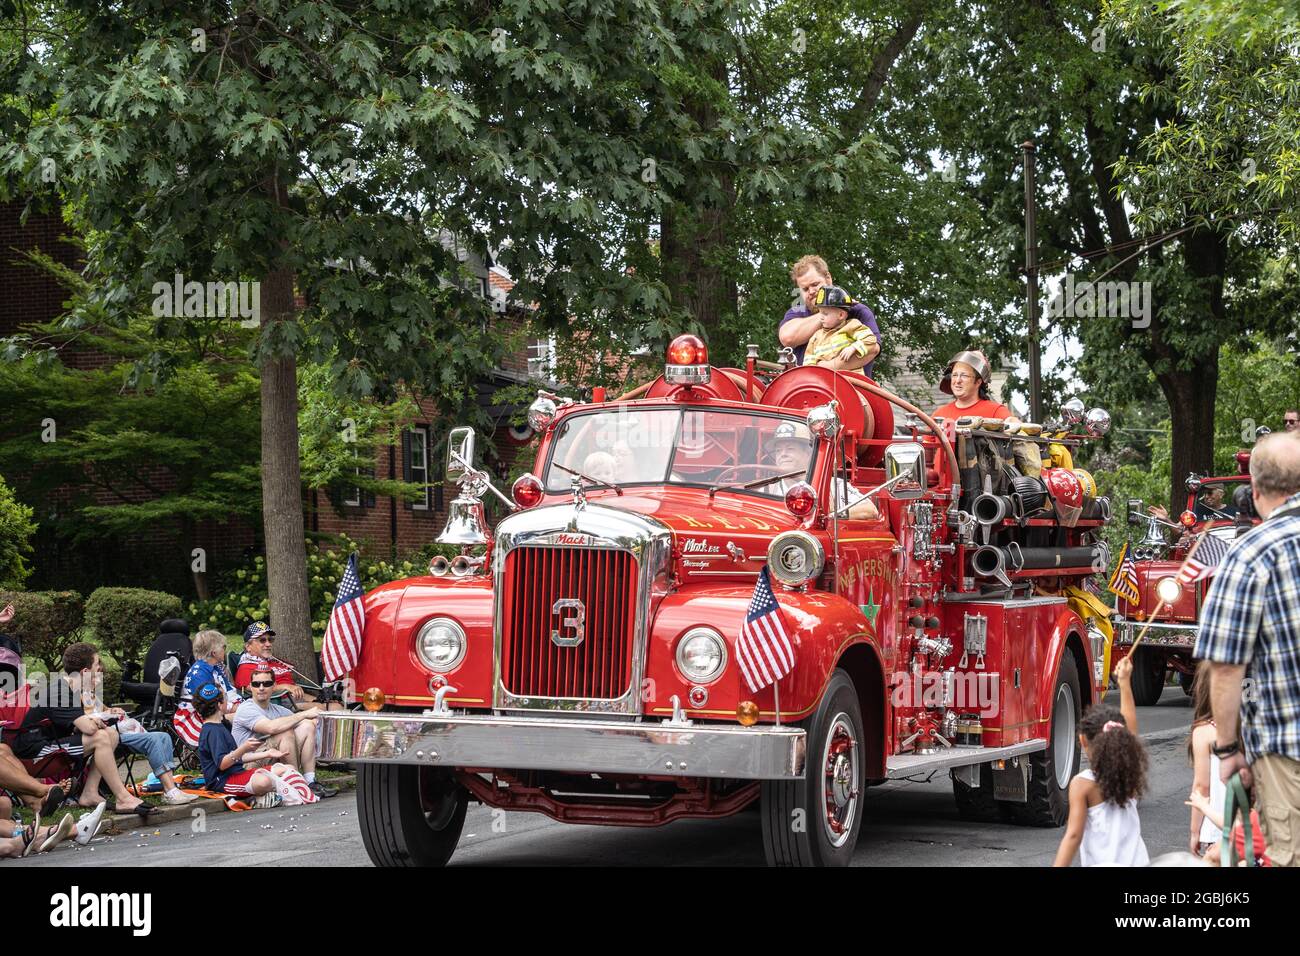 Wyomissing, Pennsylvania,-July 4, 2021: Vintage firetruck in 4th of July parade Stock Photo